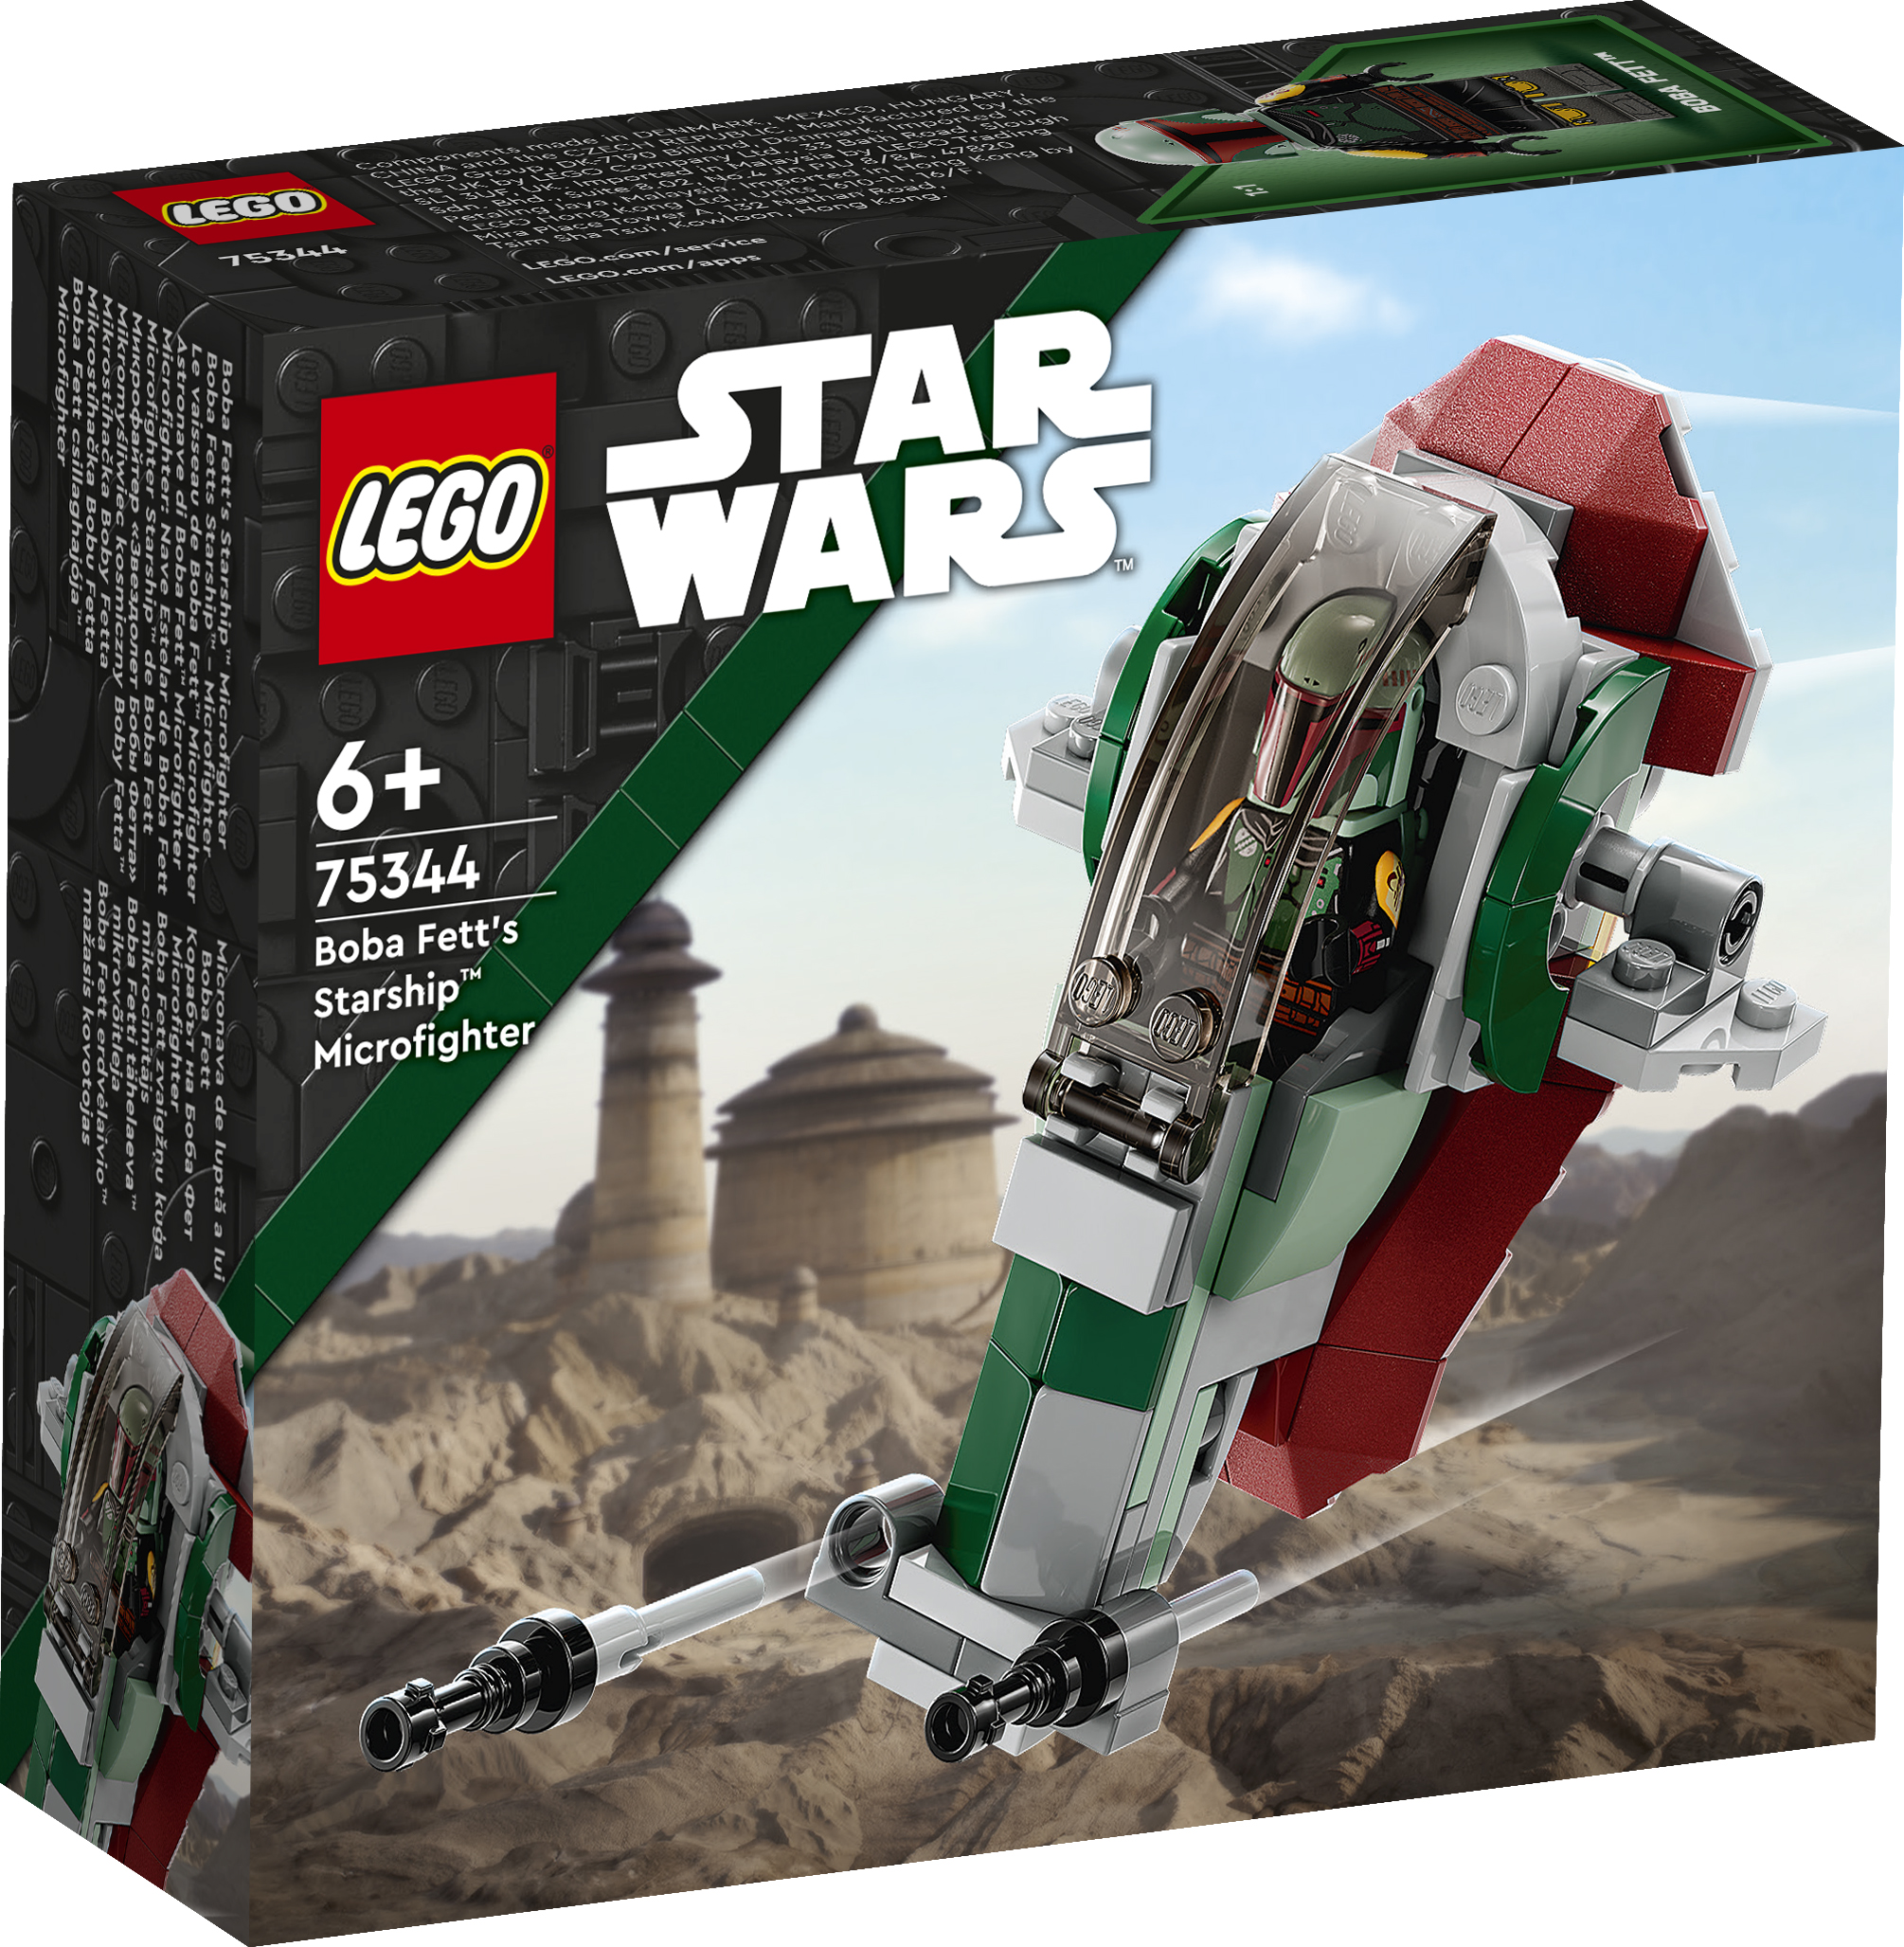 Star Wars: The Last Jedi LEGO sets officially revealed; available now  [News] - The Brothers Brick